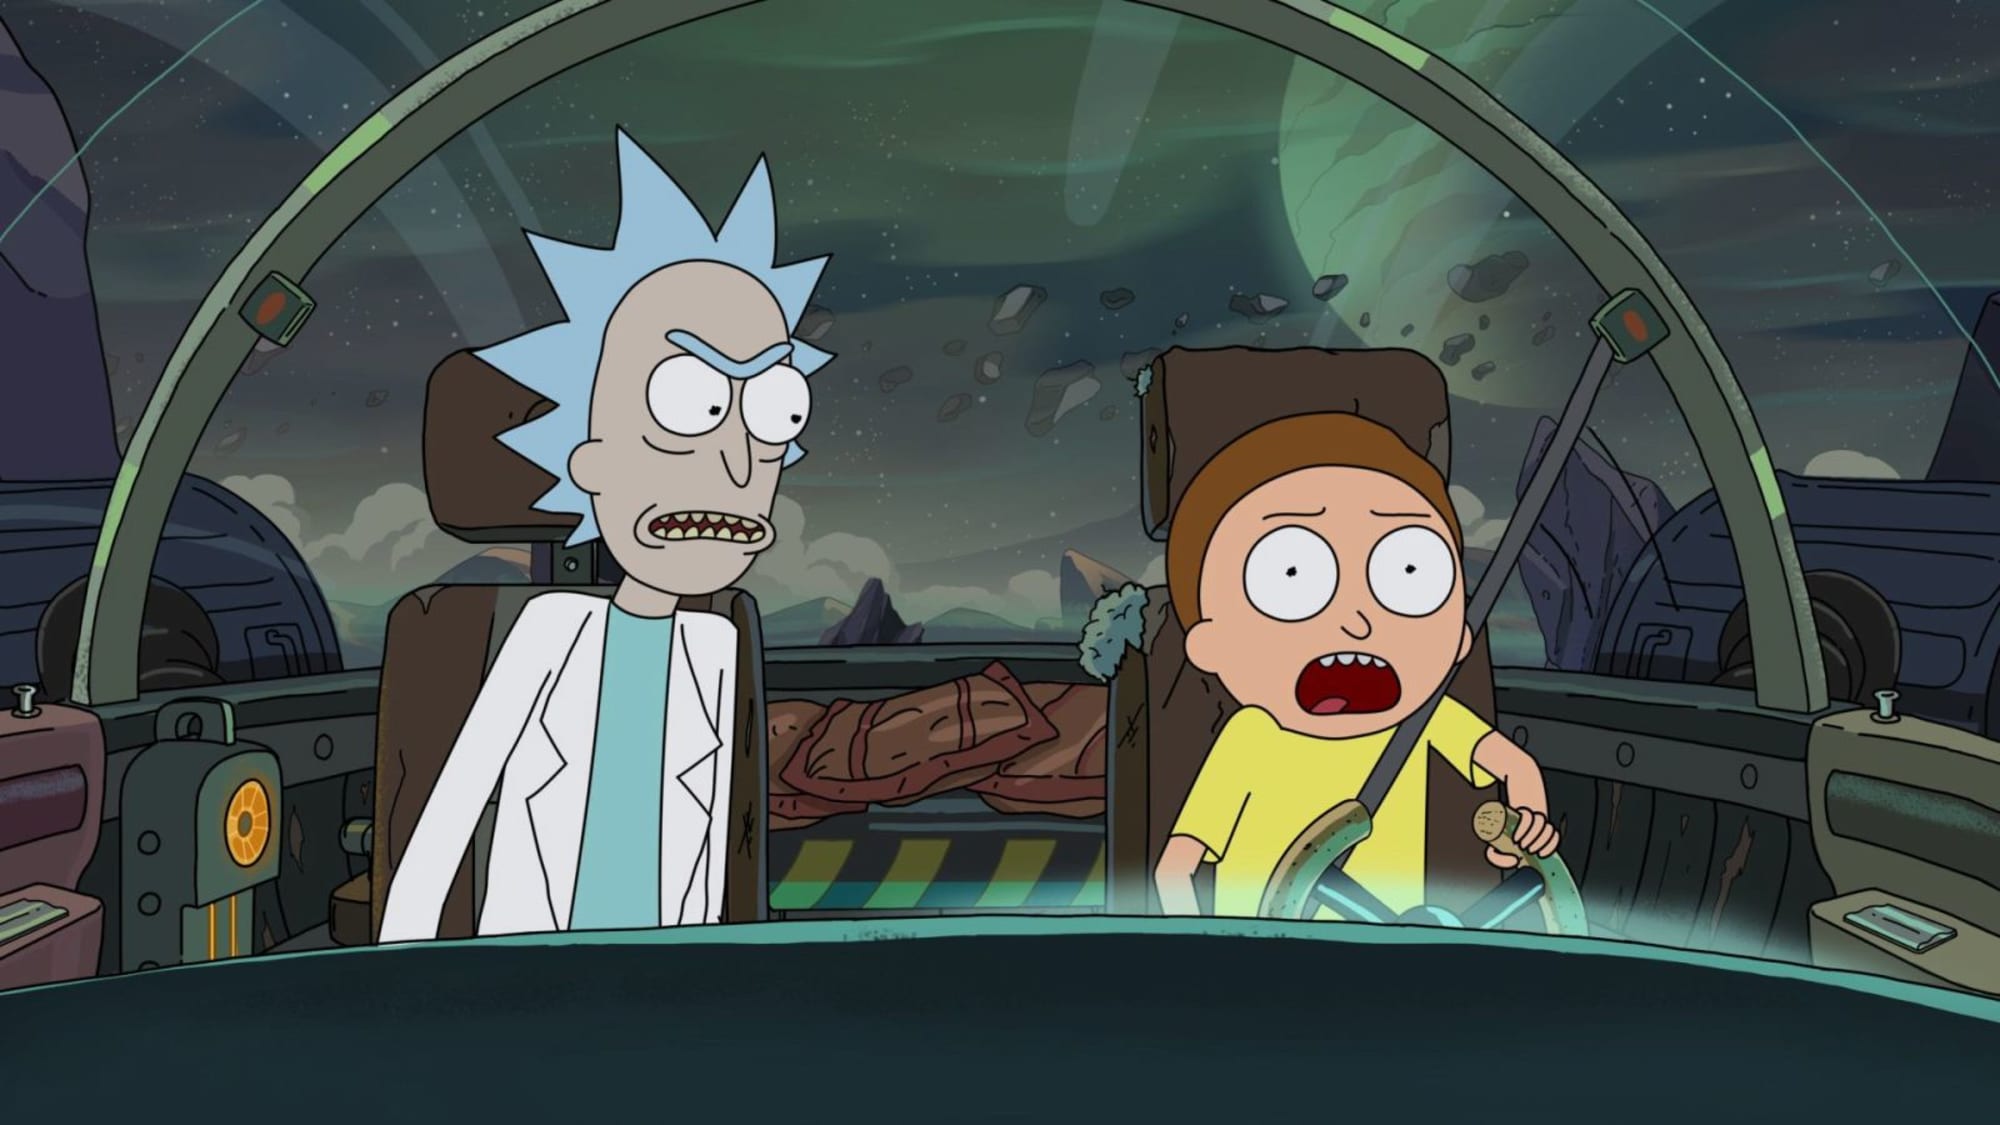 rick-and-morty-season-4-now-streaming-episodes-1-to-5